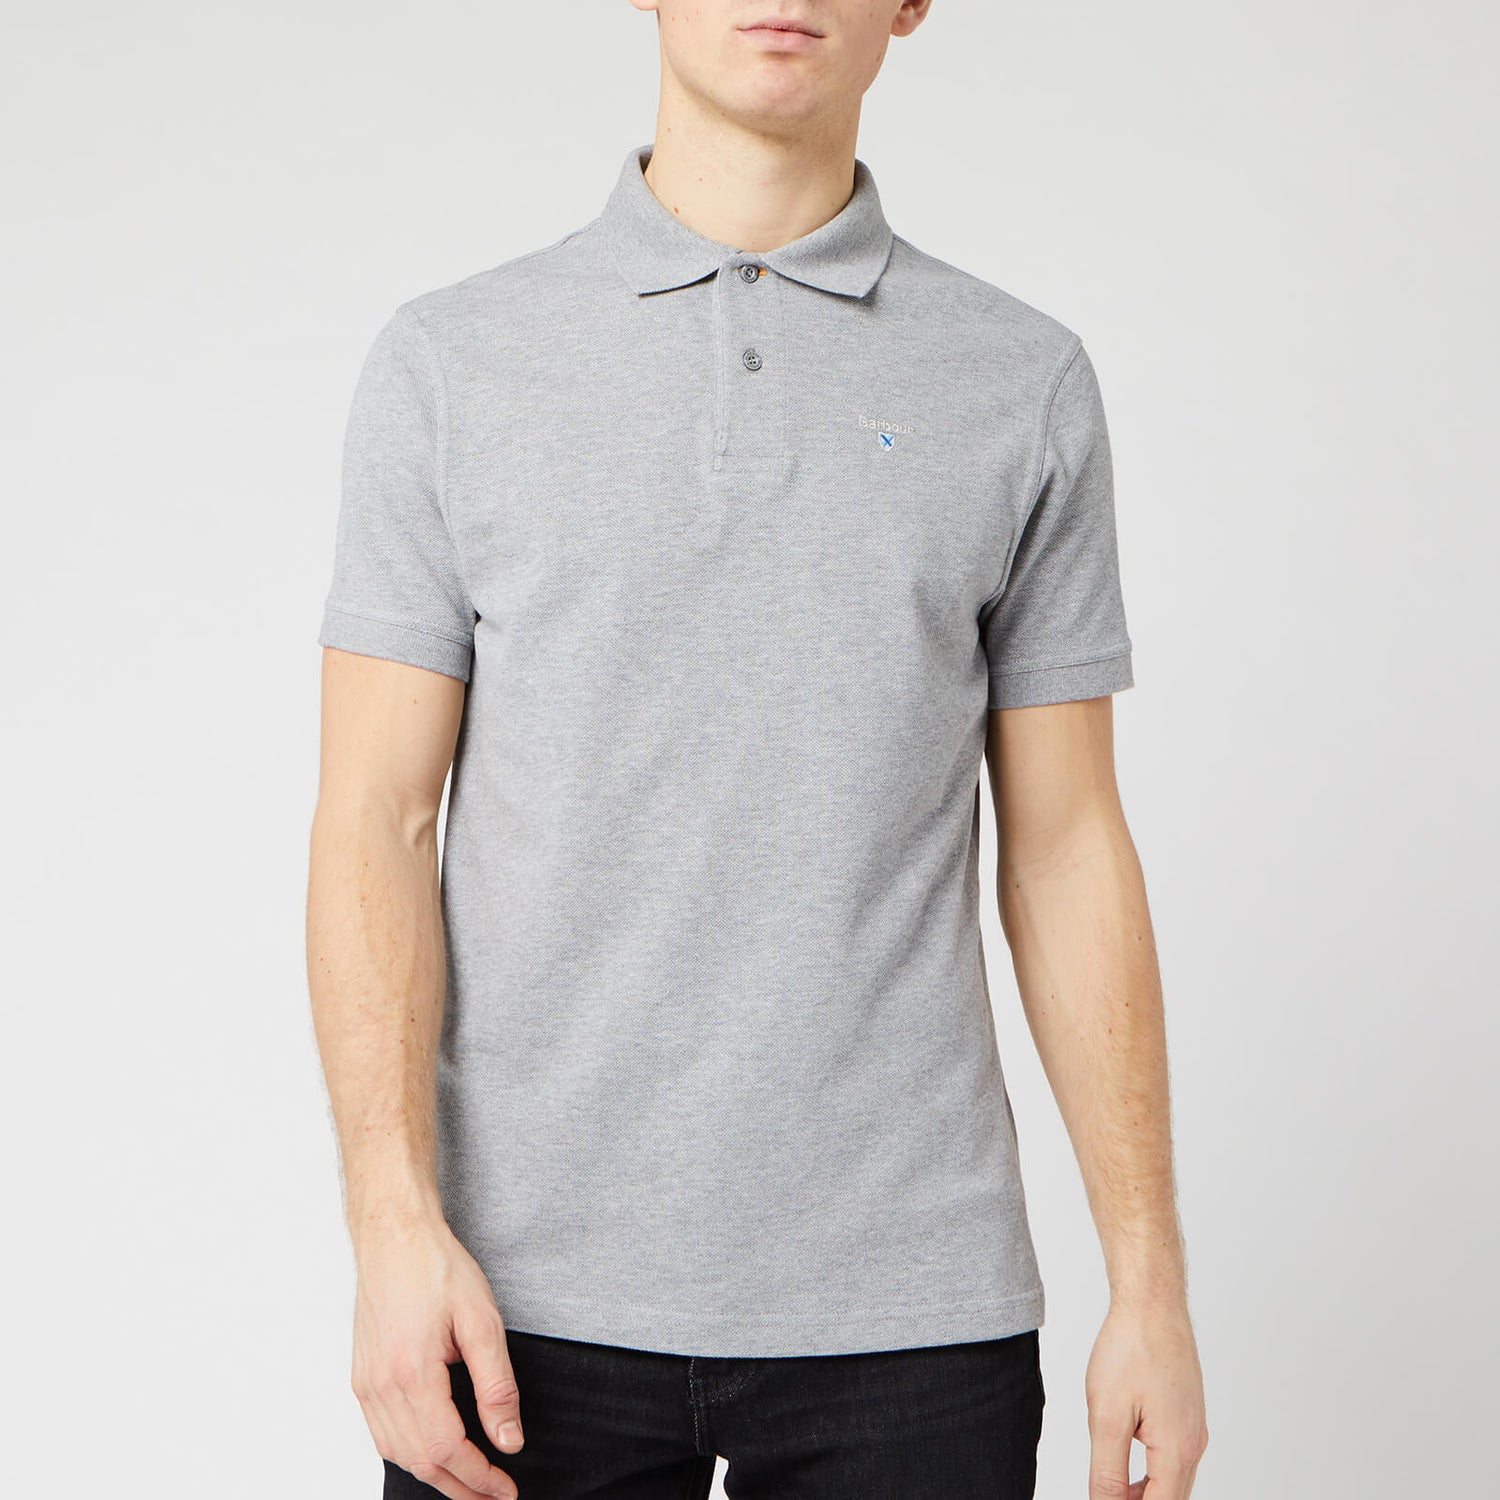 Barbour Men's Sports Polo - Grey Marl - S